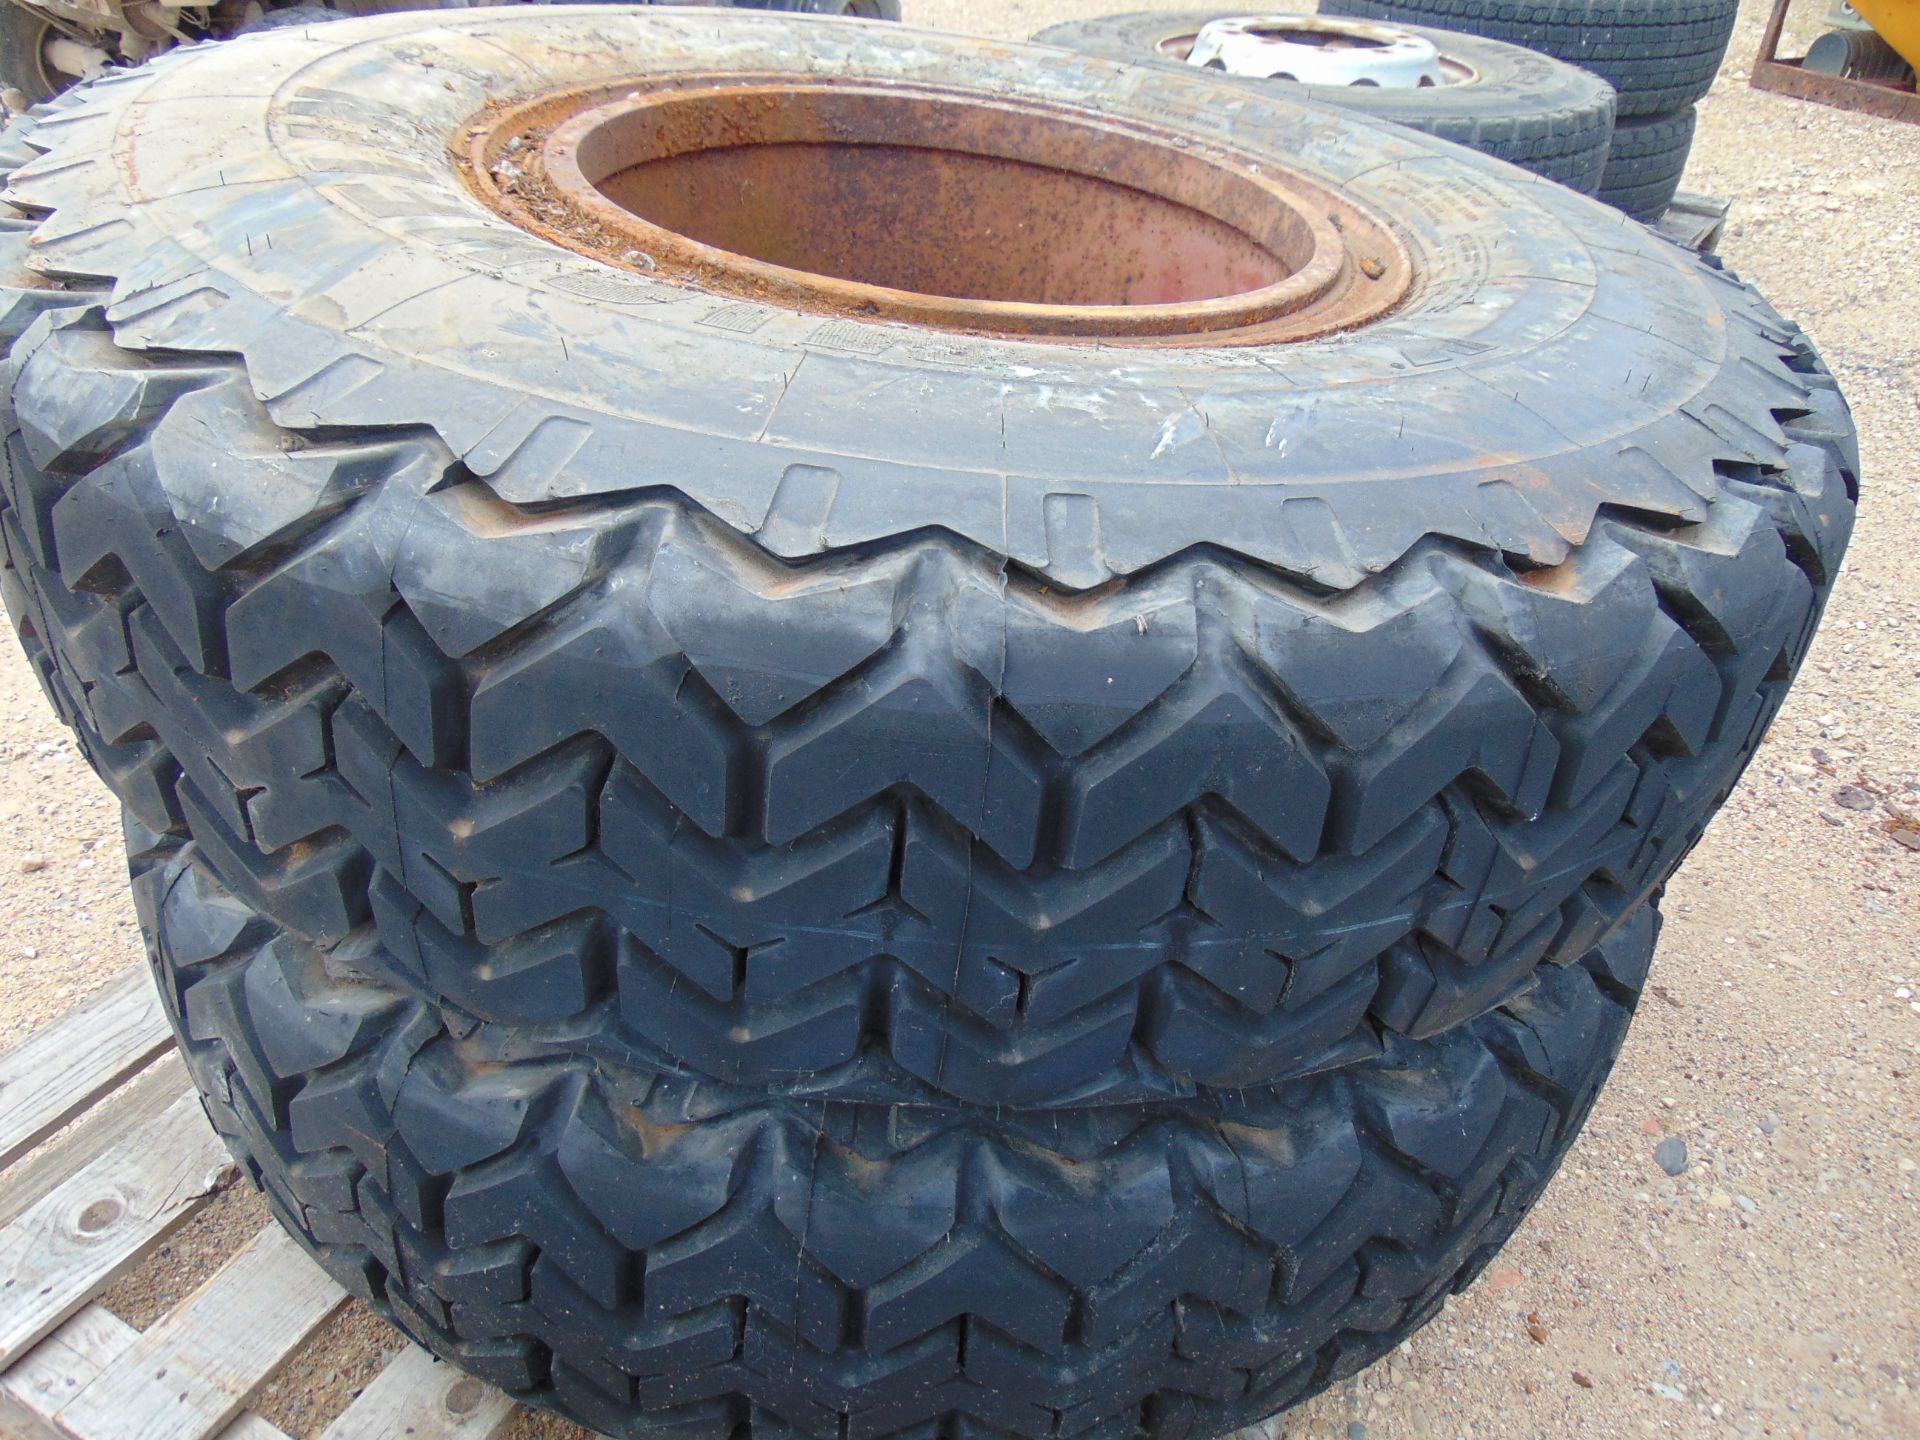 2 x Michelin X 1400 R 24 on Rims - Image 3 of 5